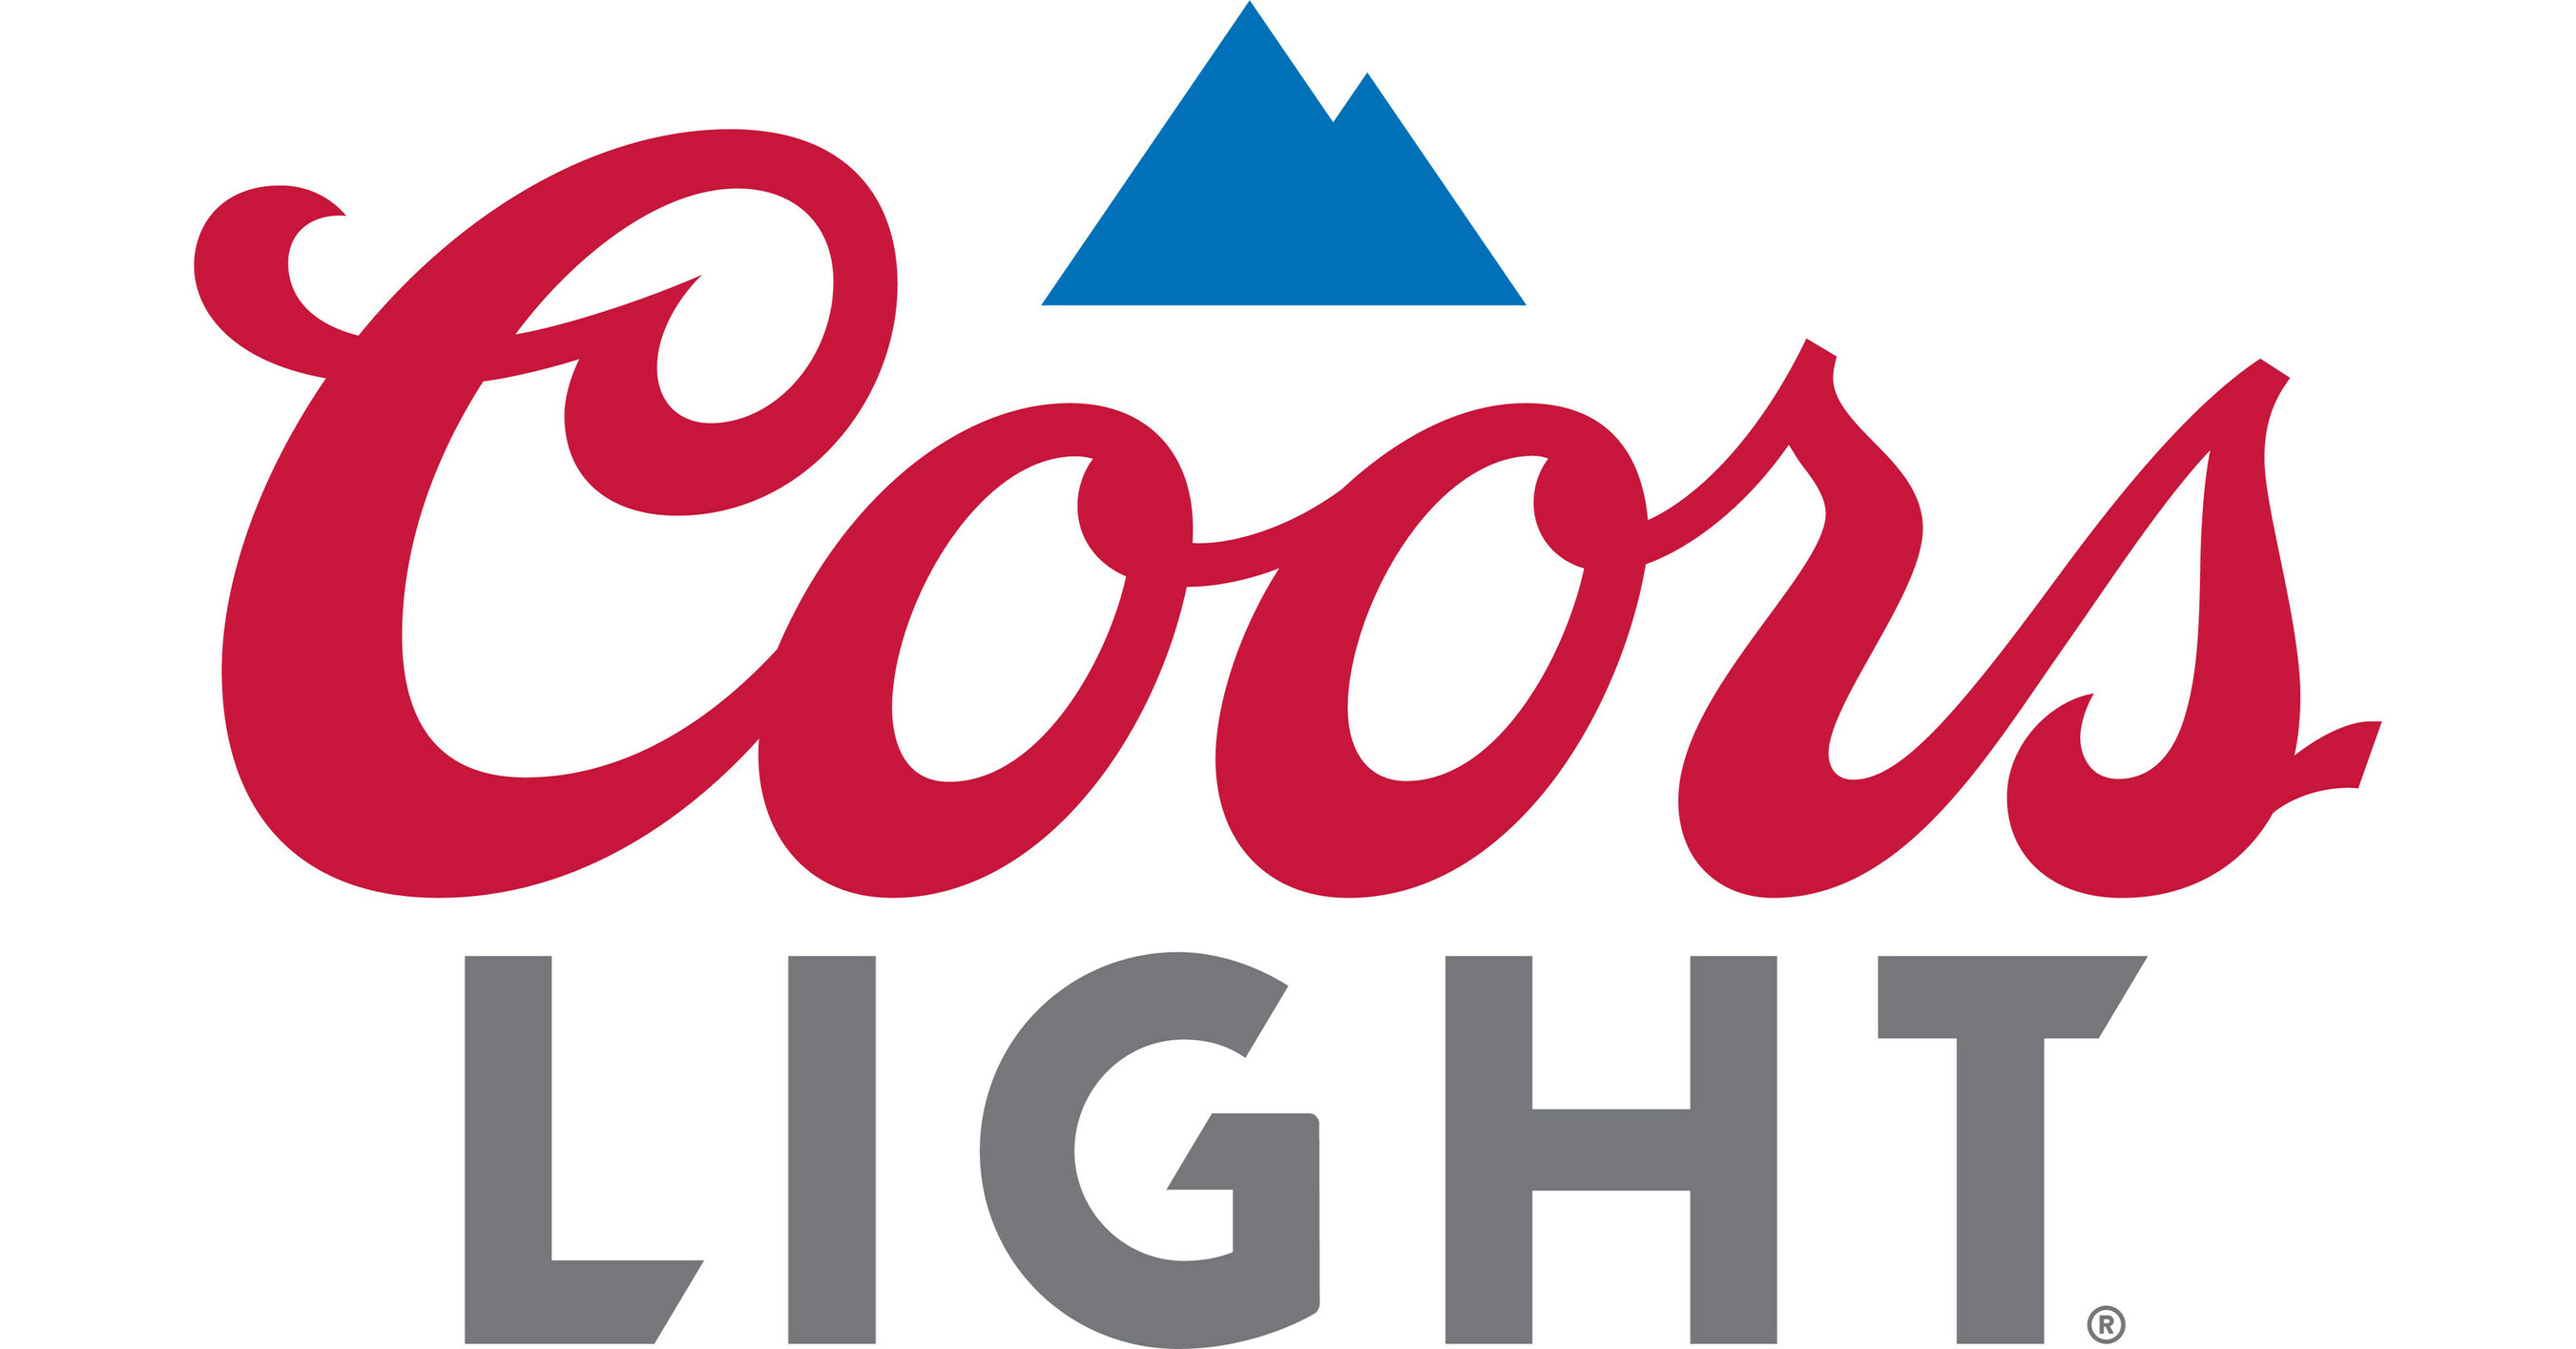 Coors Light has a 'Beer Bale' cooler. Here's how to buy, and maybe win,  one. 